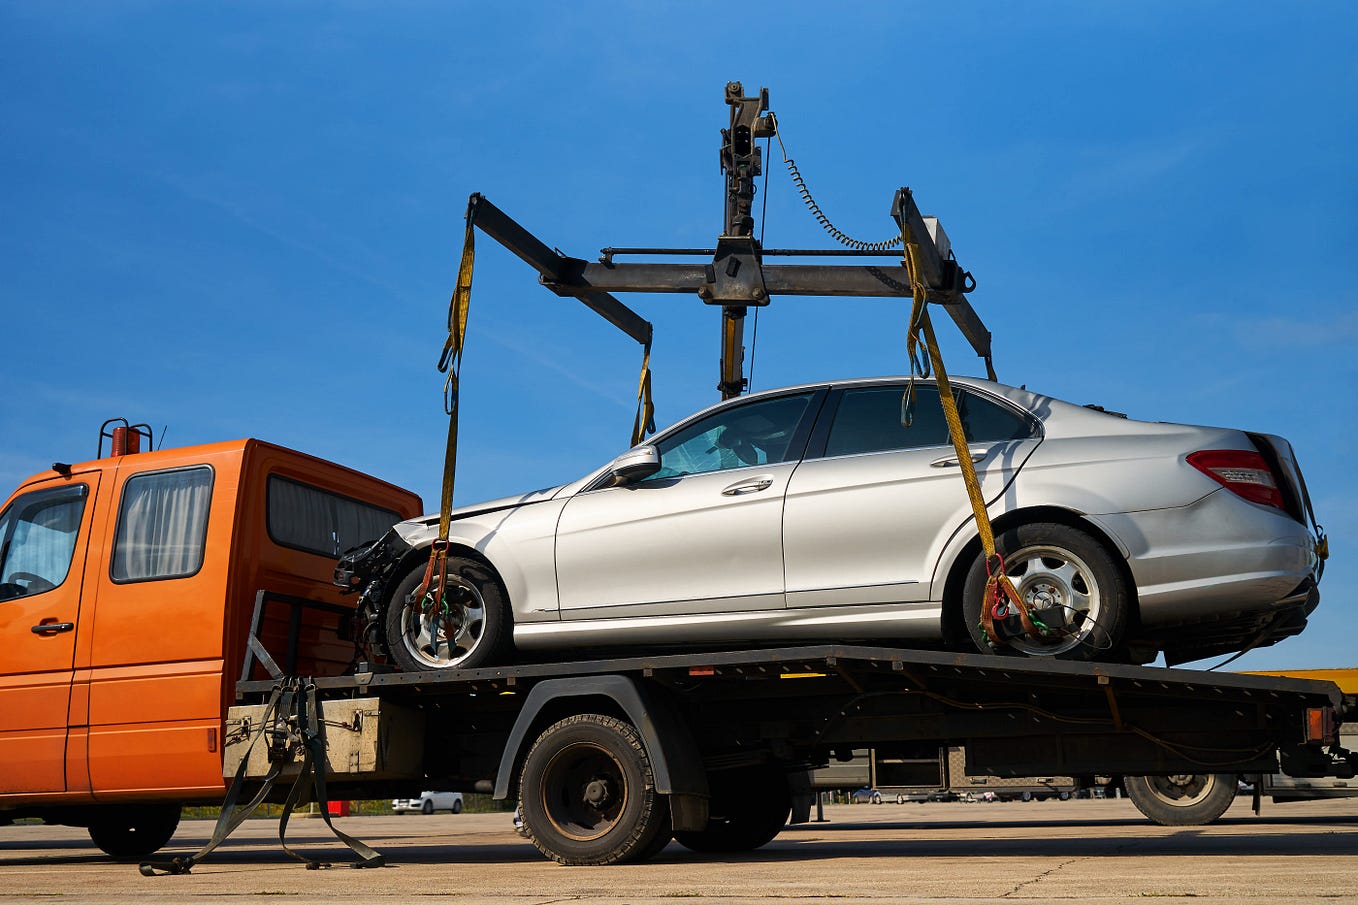 What To Do When Your Car Is Stuck In The Mud And Need Towing Service